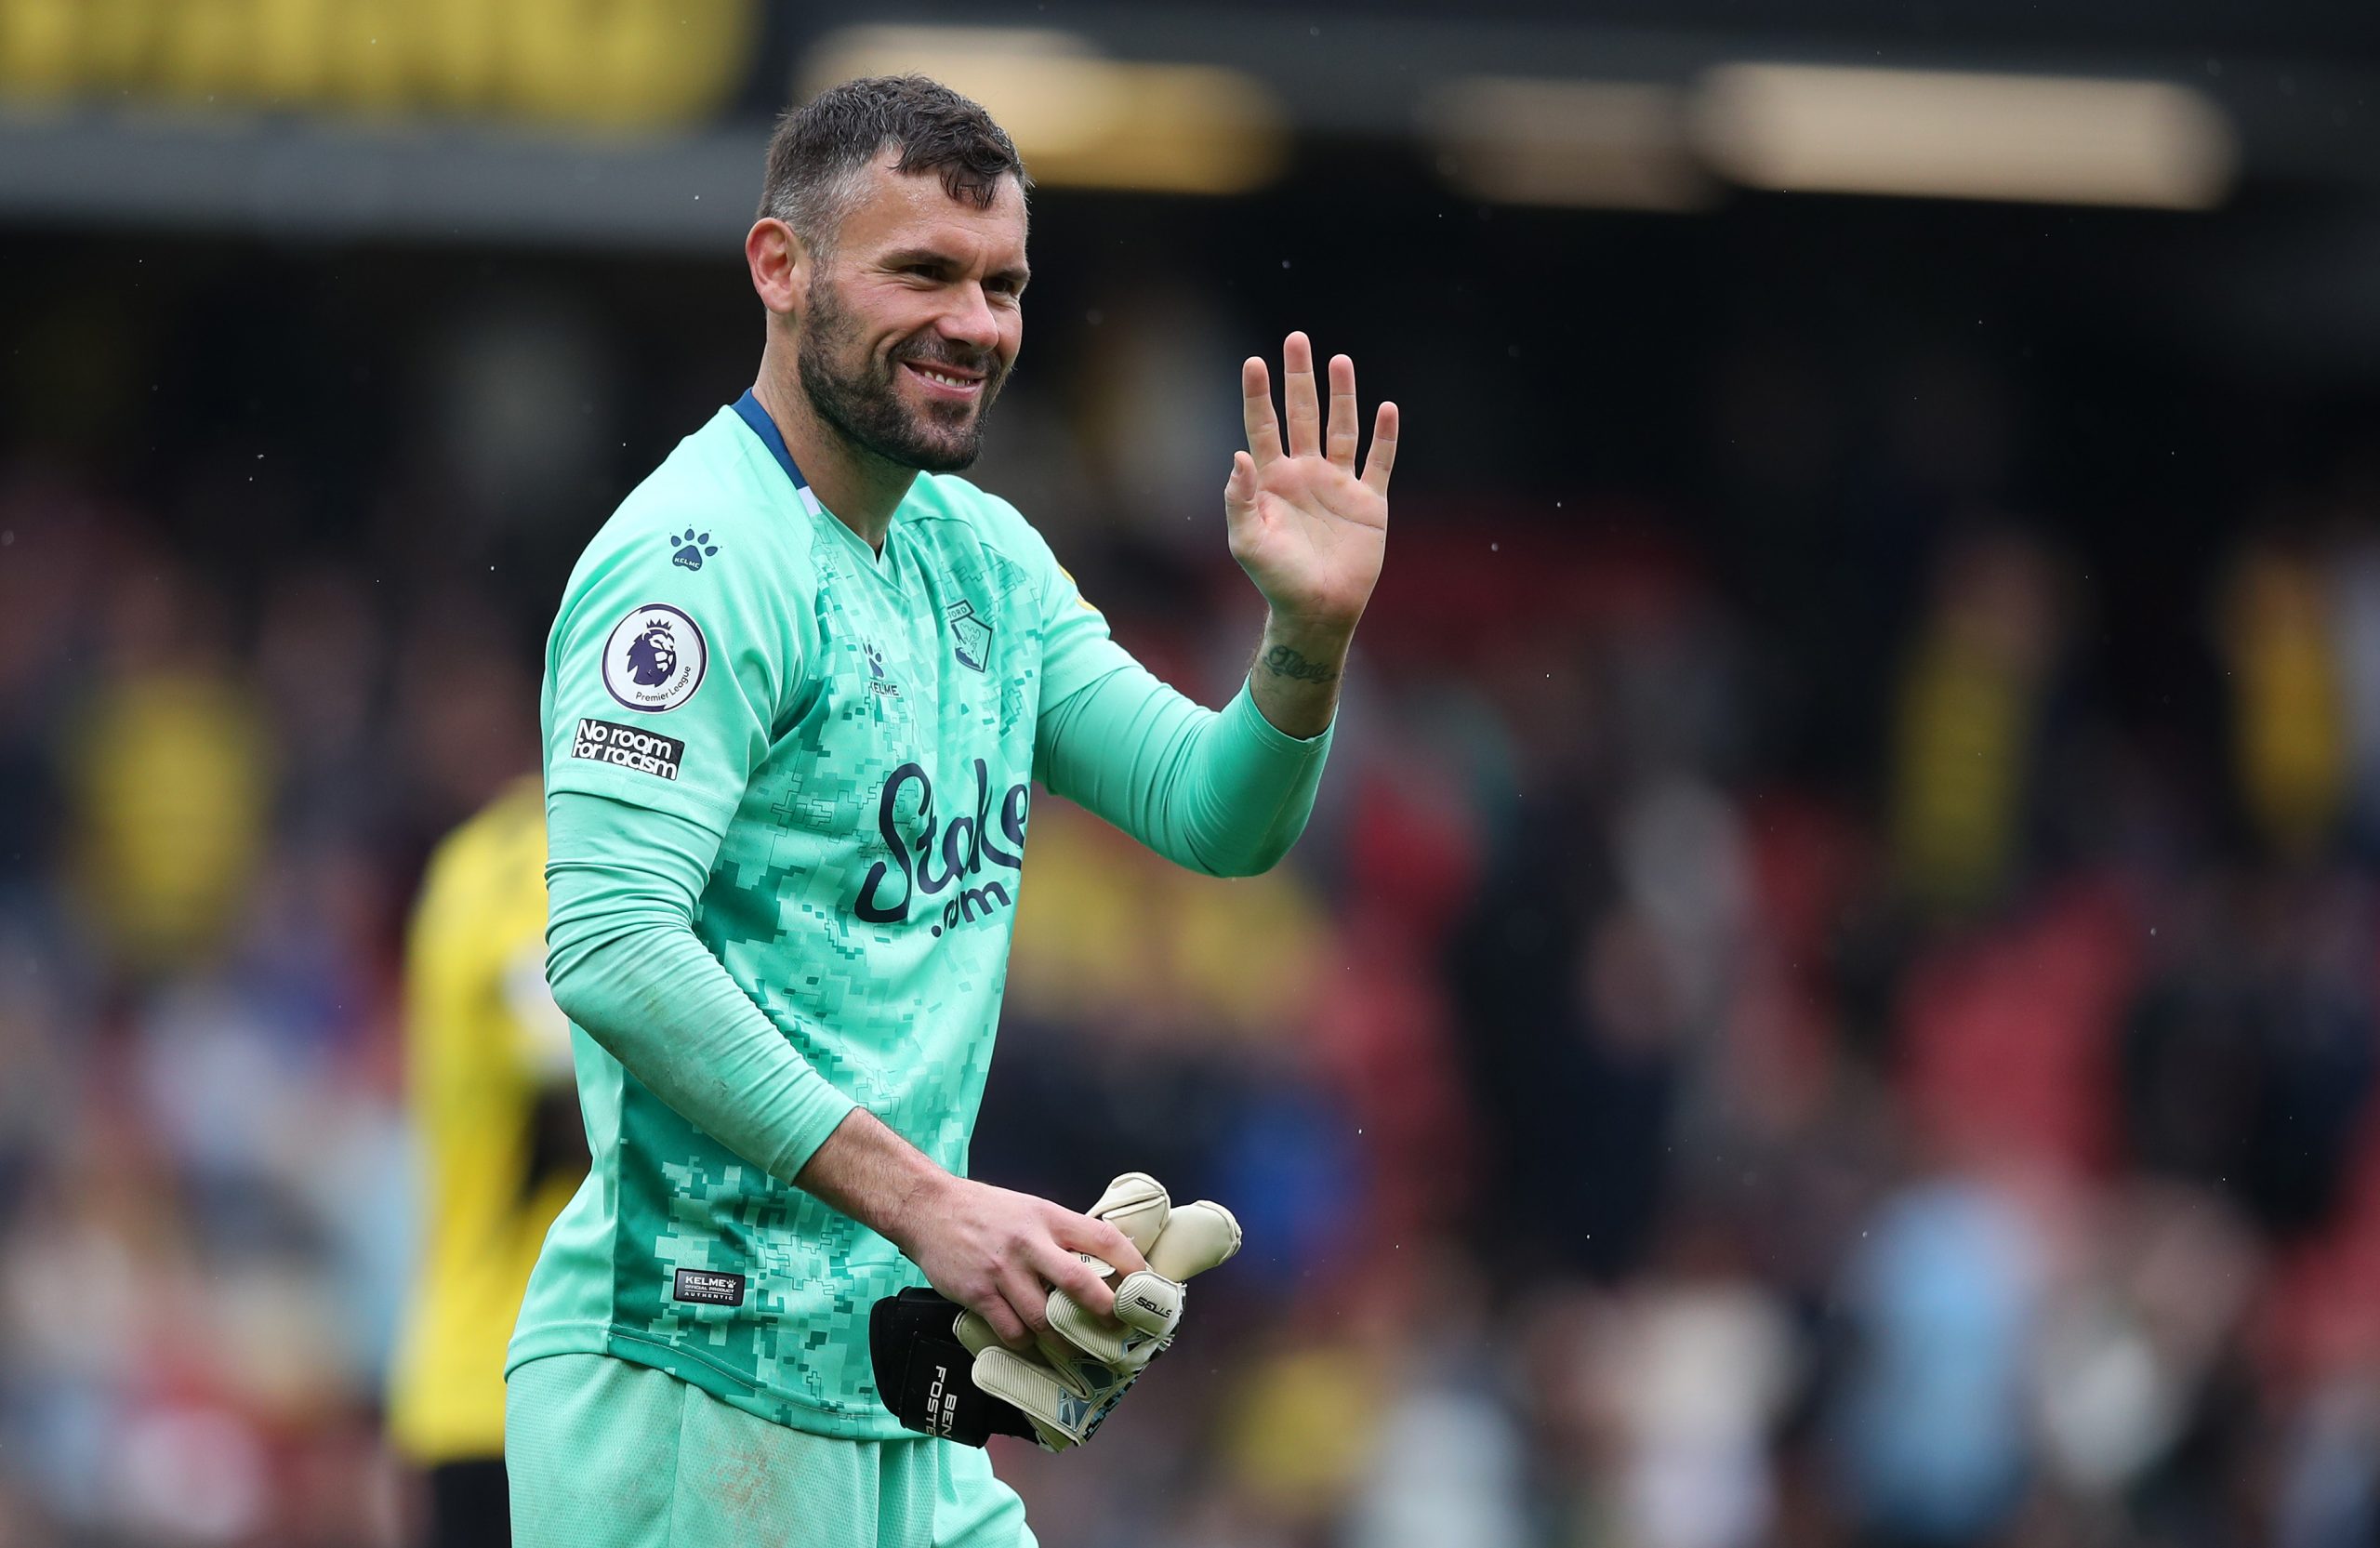 Ben Foster of Watford FC interacts with the crowd following the Premier League match between Watford and Leicester City at Vicarage Road on May 15, 2022 in Watford, England. (Photo by Luke Walker/Getty Images)